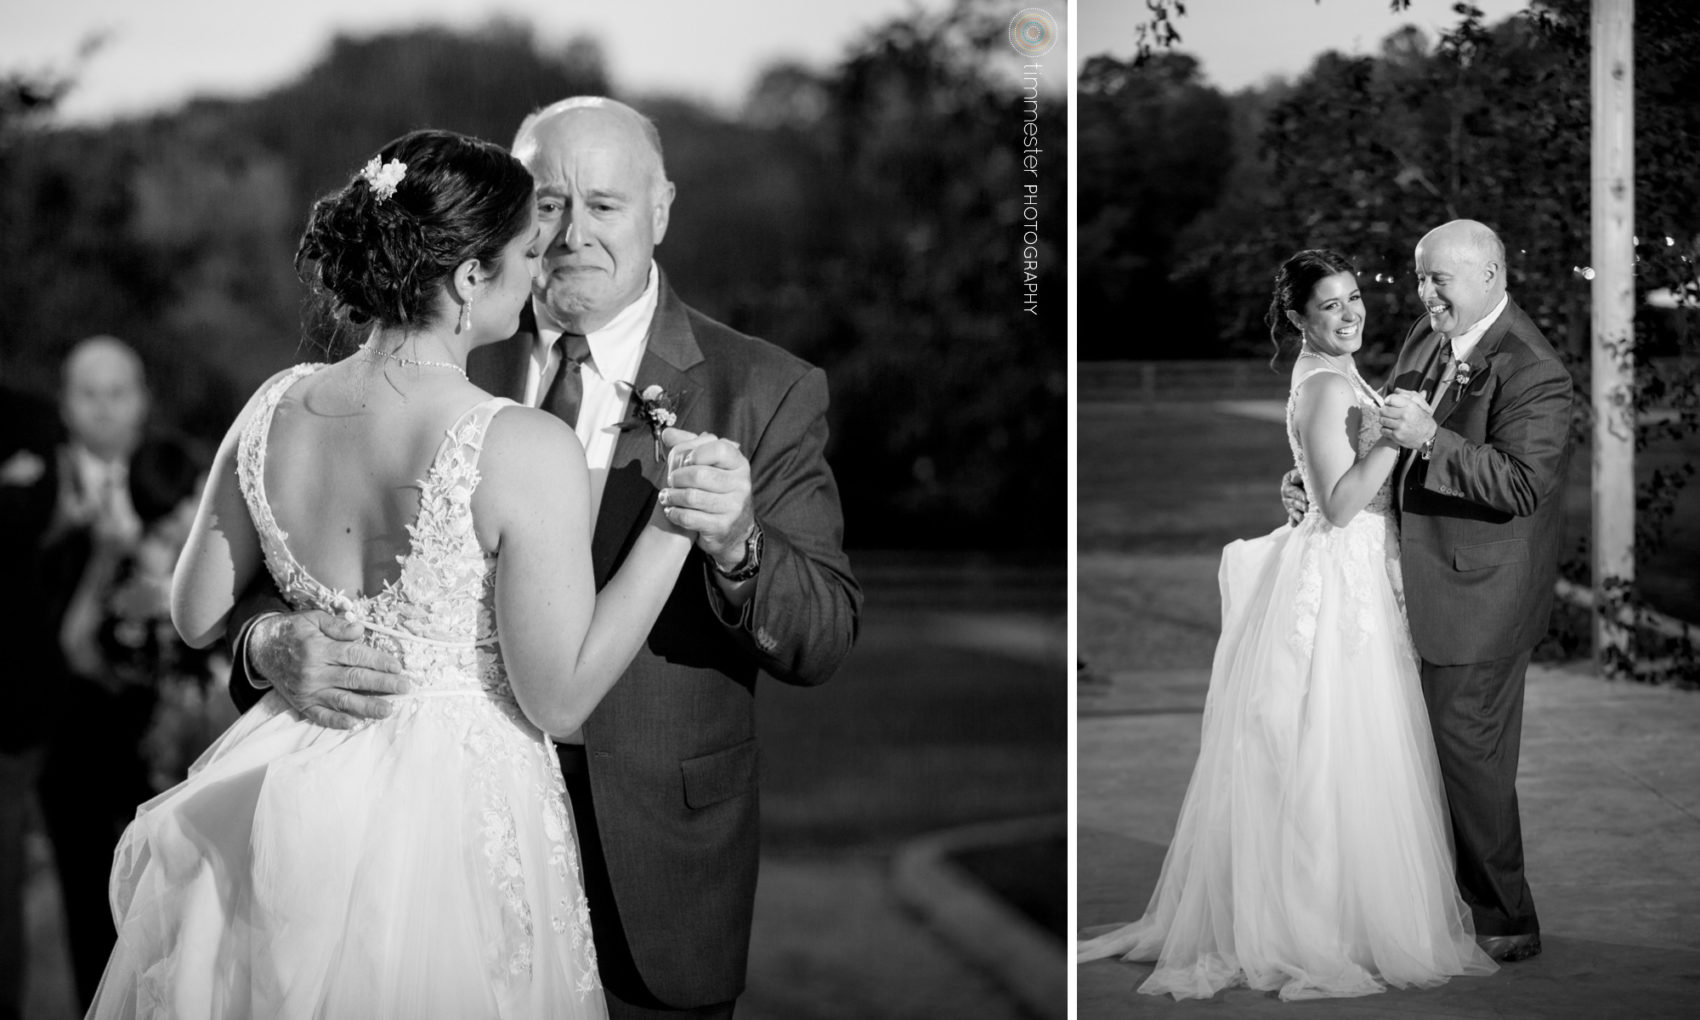 The Father and Daughter Dance during a reception at Rivers and Bridges, Dorsett House